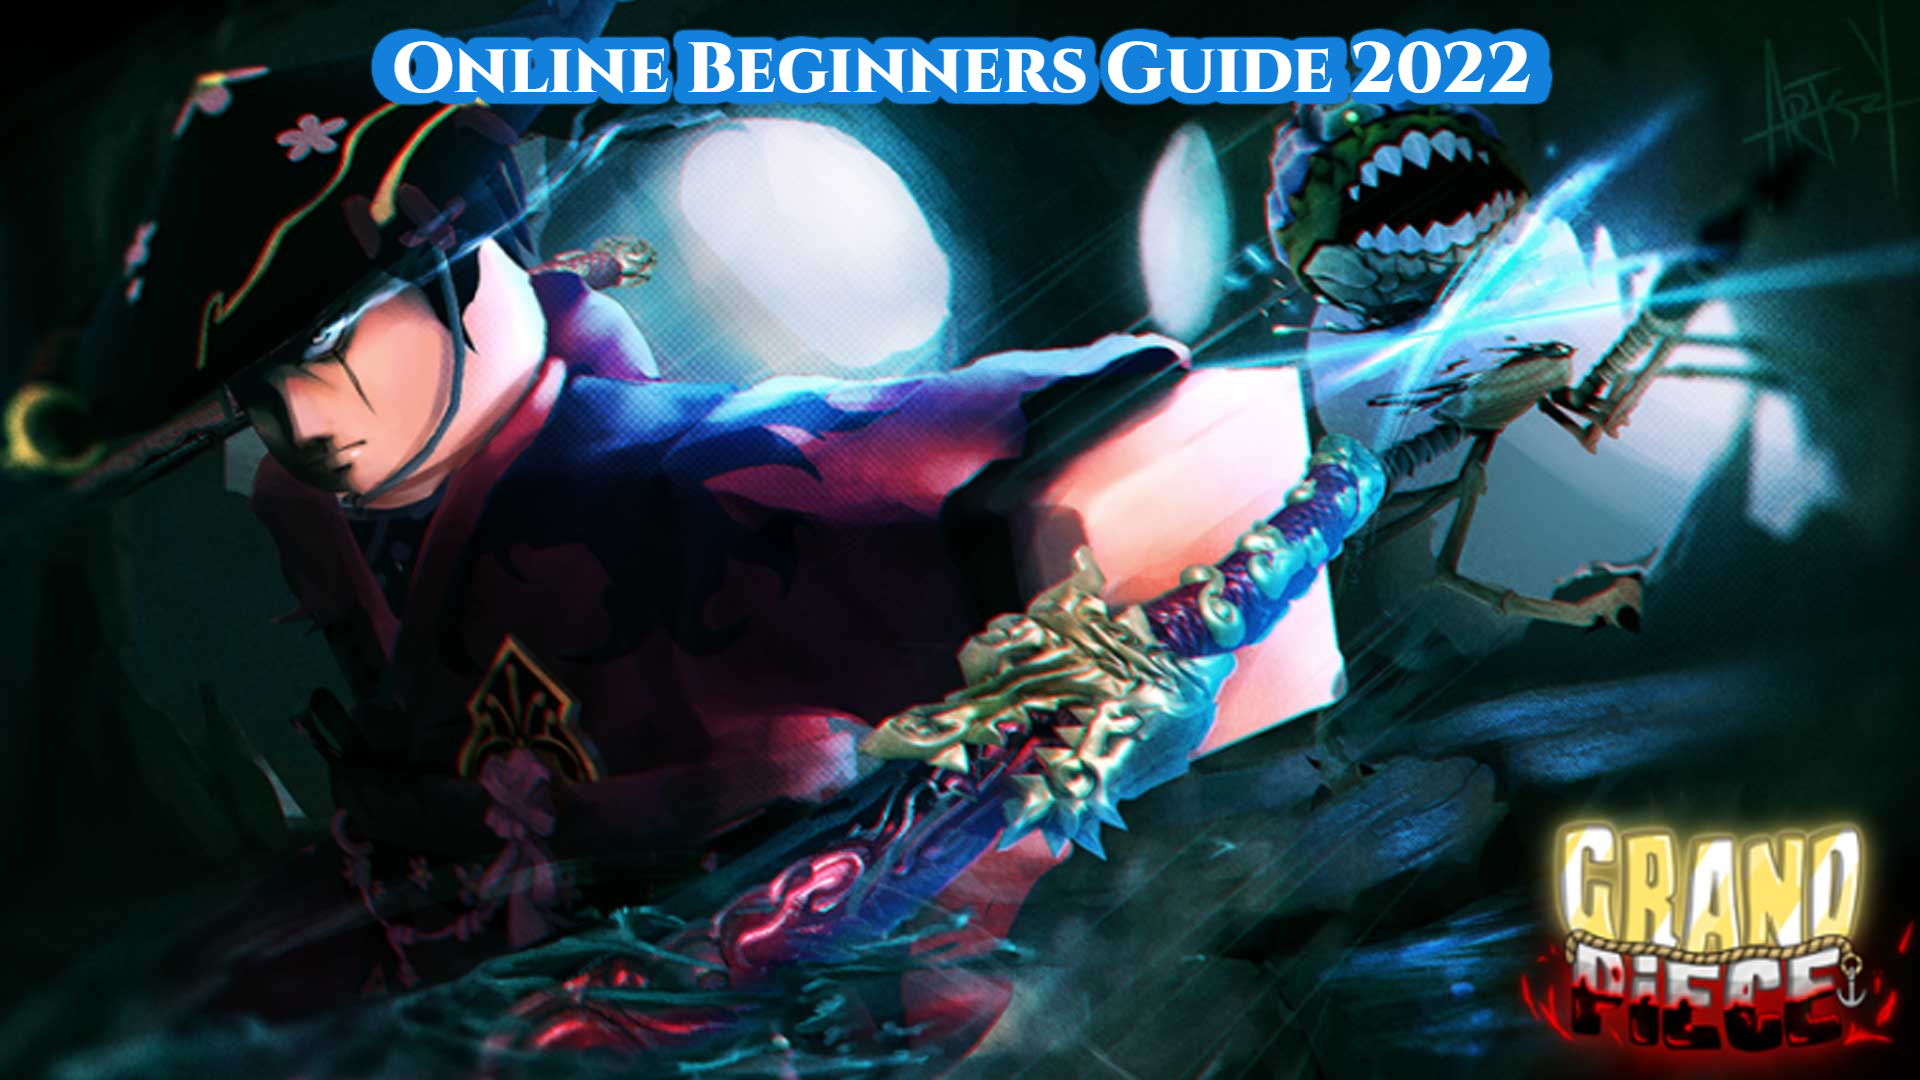 You are currently viewing Grand Piece Online Beginners Guide 2022